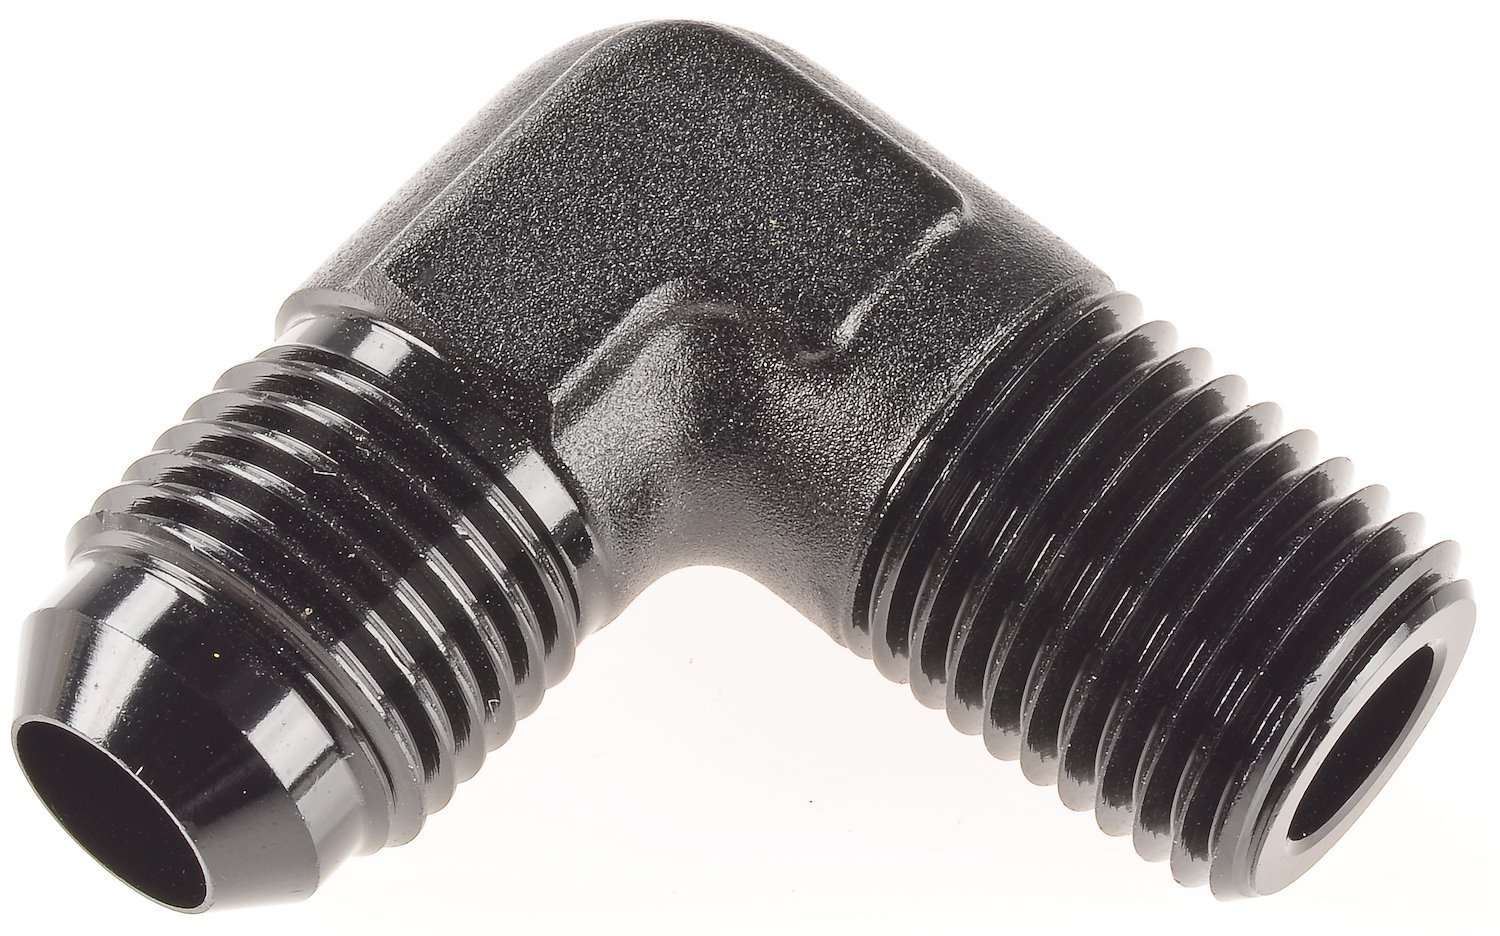 AN to NPT 90-Degree Adapter Fitting [-6 AN Male to 1/4 in. NPT Male, Black]